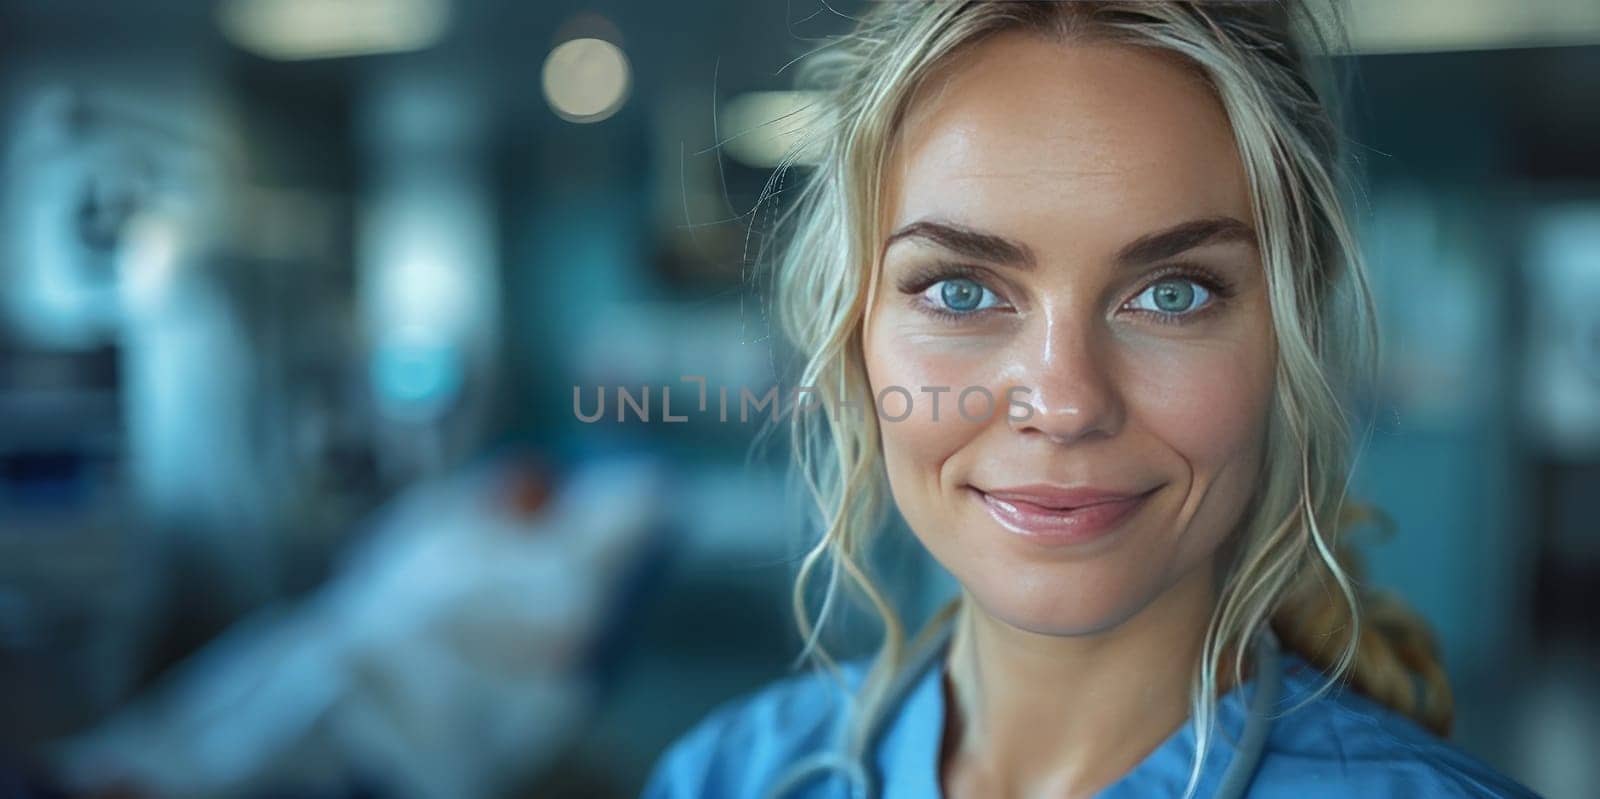 A female doctor with electric blue eyes and a bright smile is posing for a portrait photography in a hospital room, looking happy and pleased